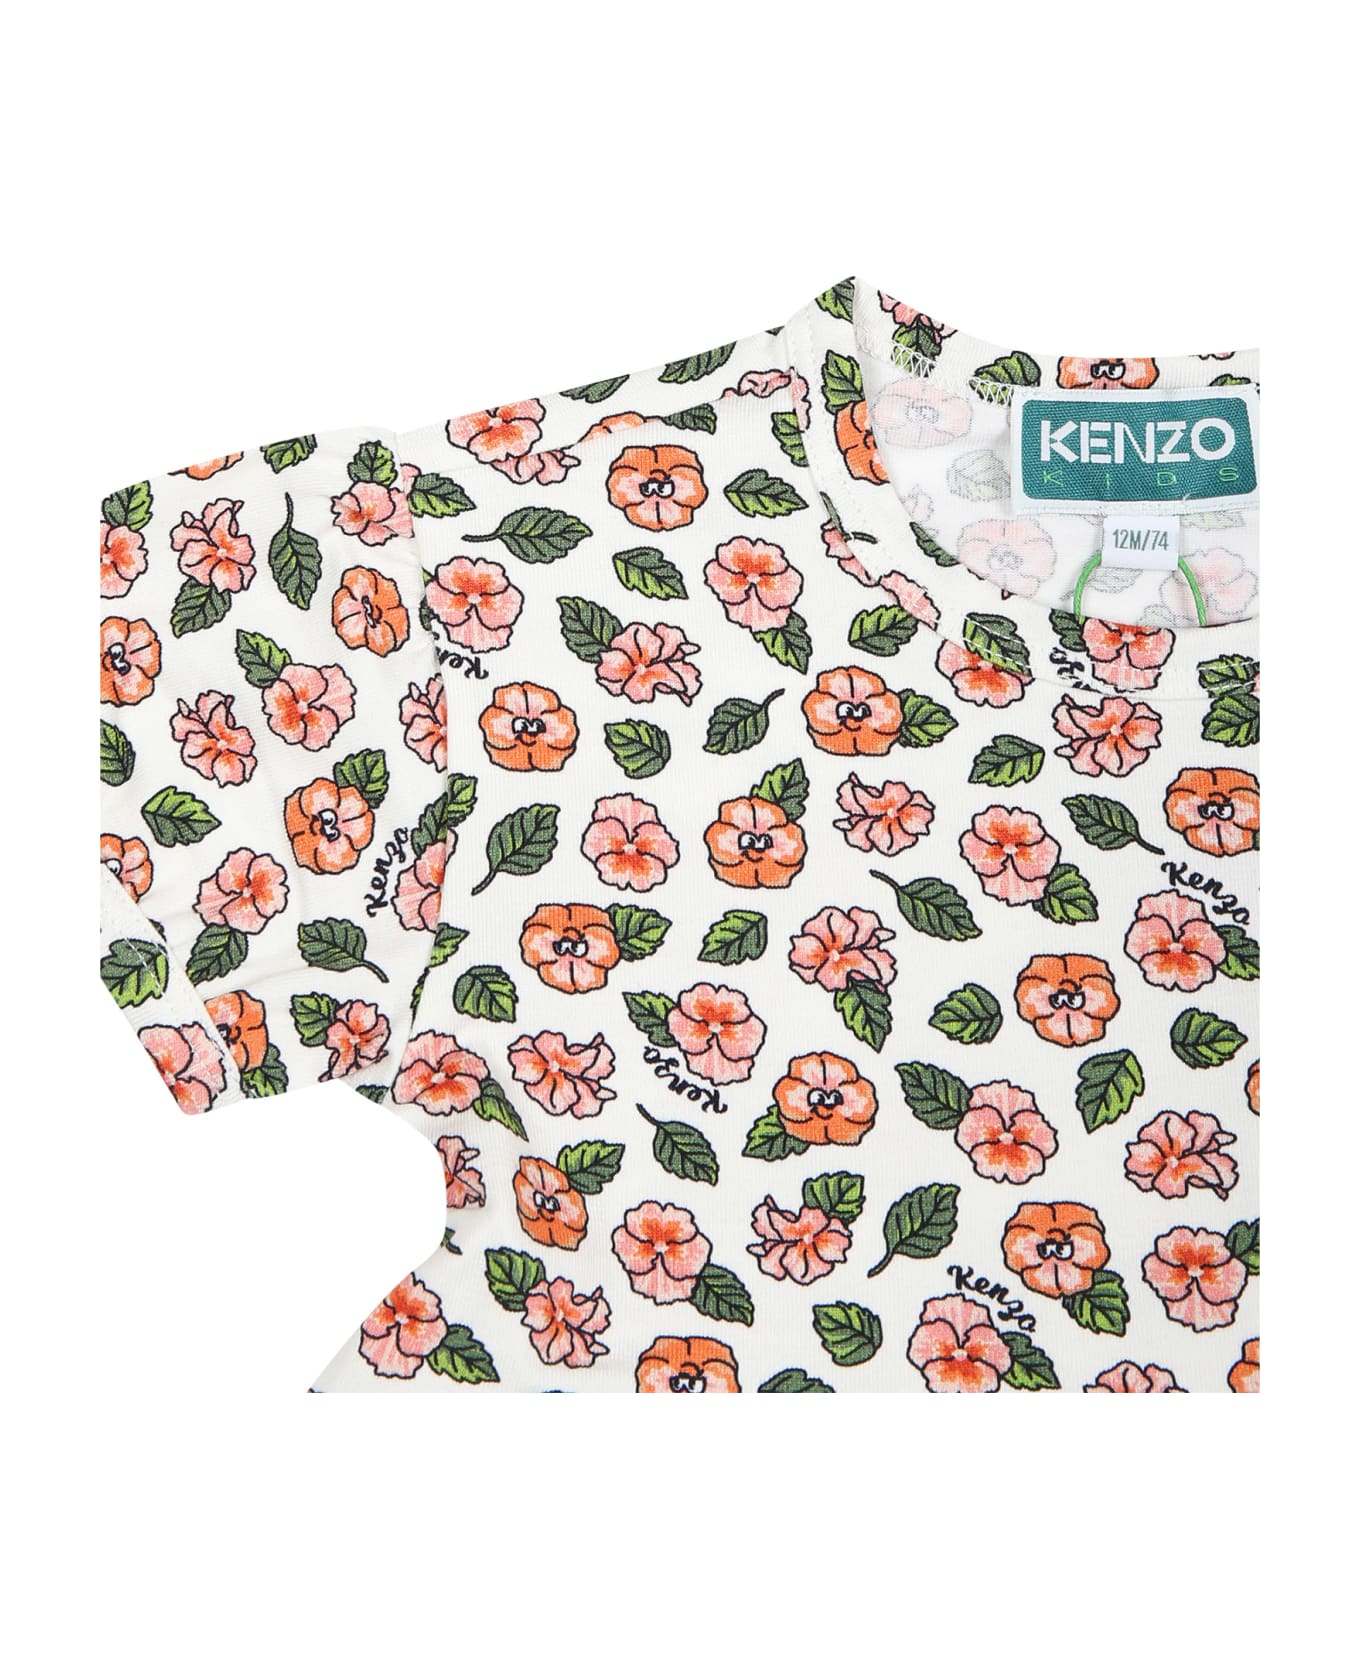 Kenzo Kids White Dress For Baby With Floral Print - White ウェア